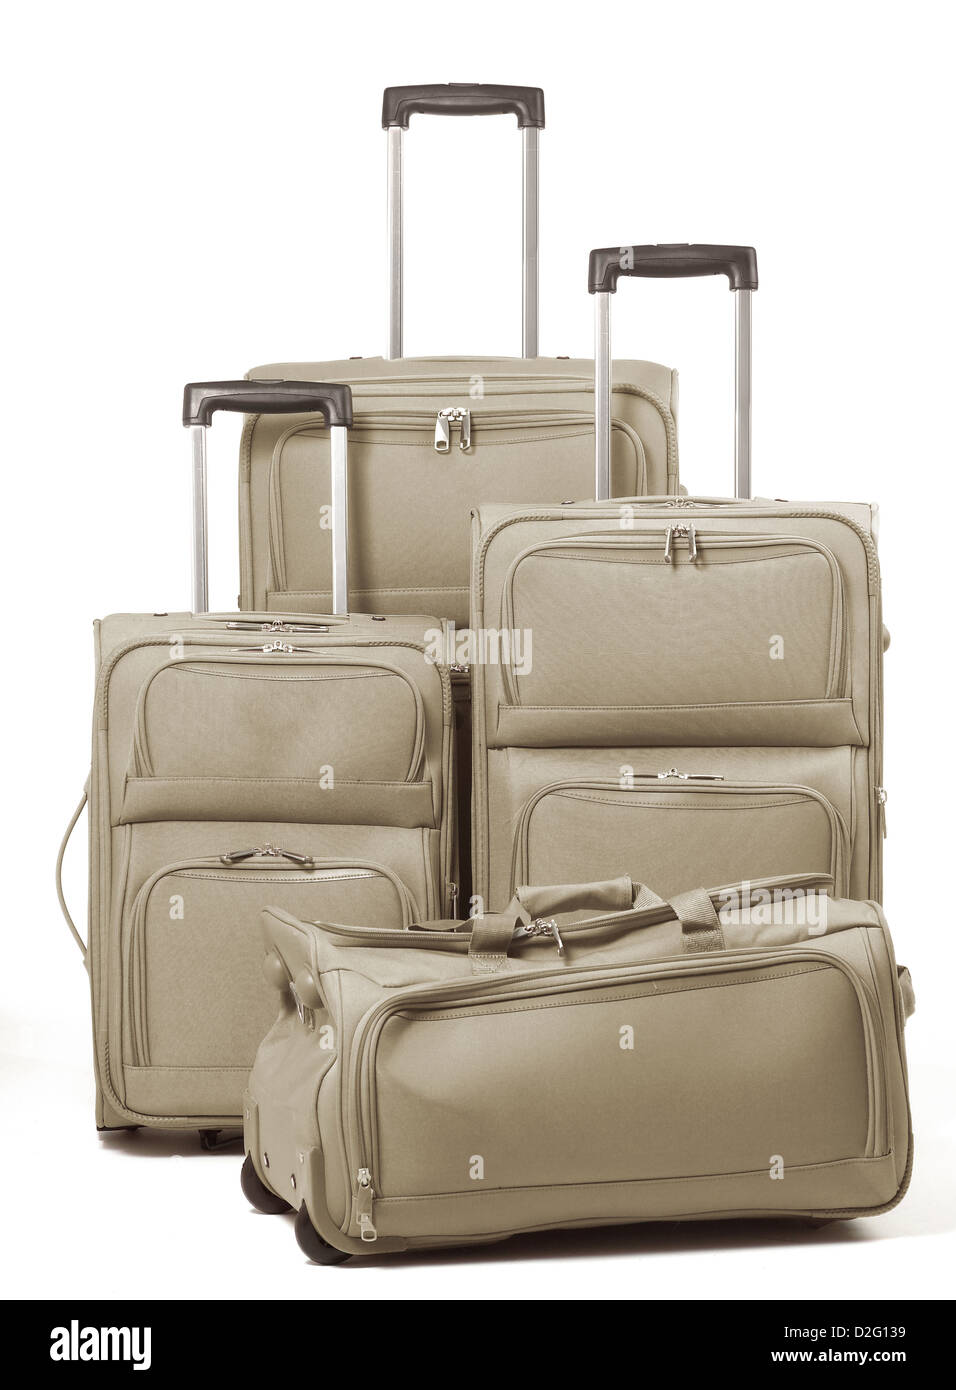 Suitcases against a white background Stock Photo